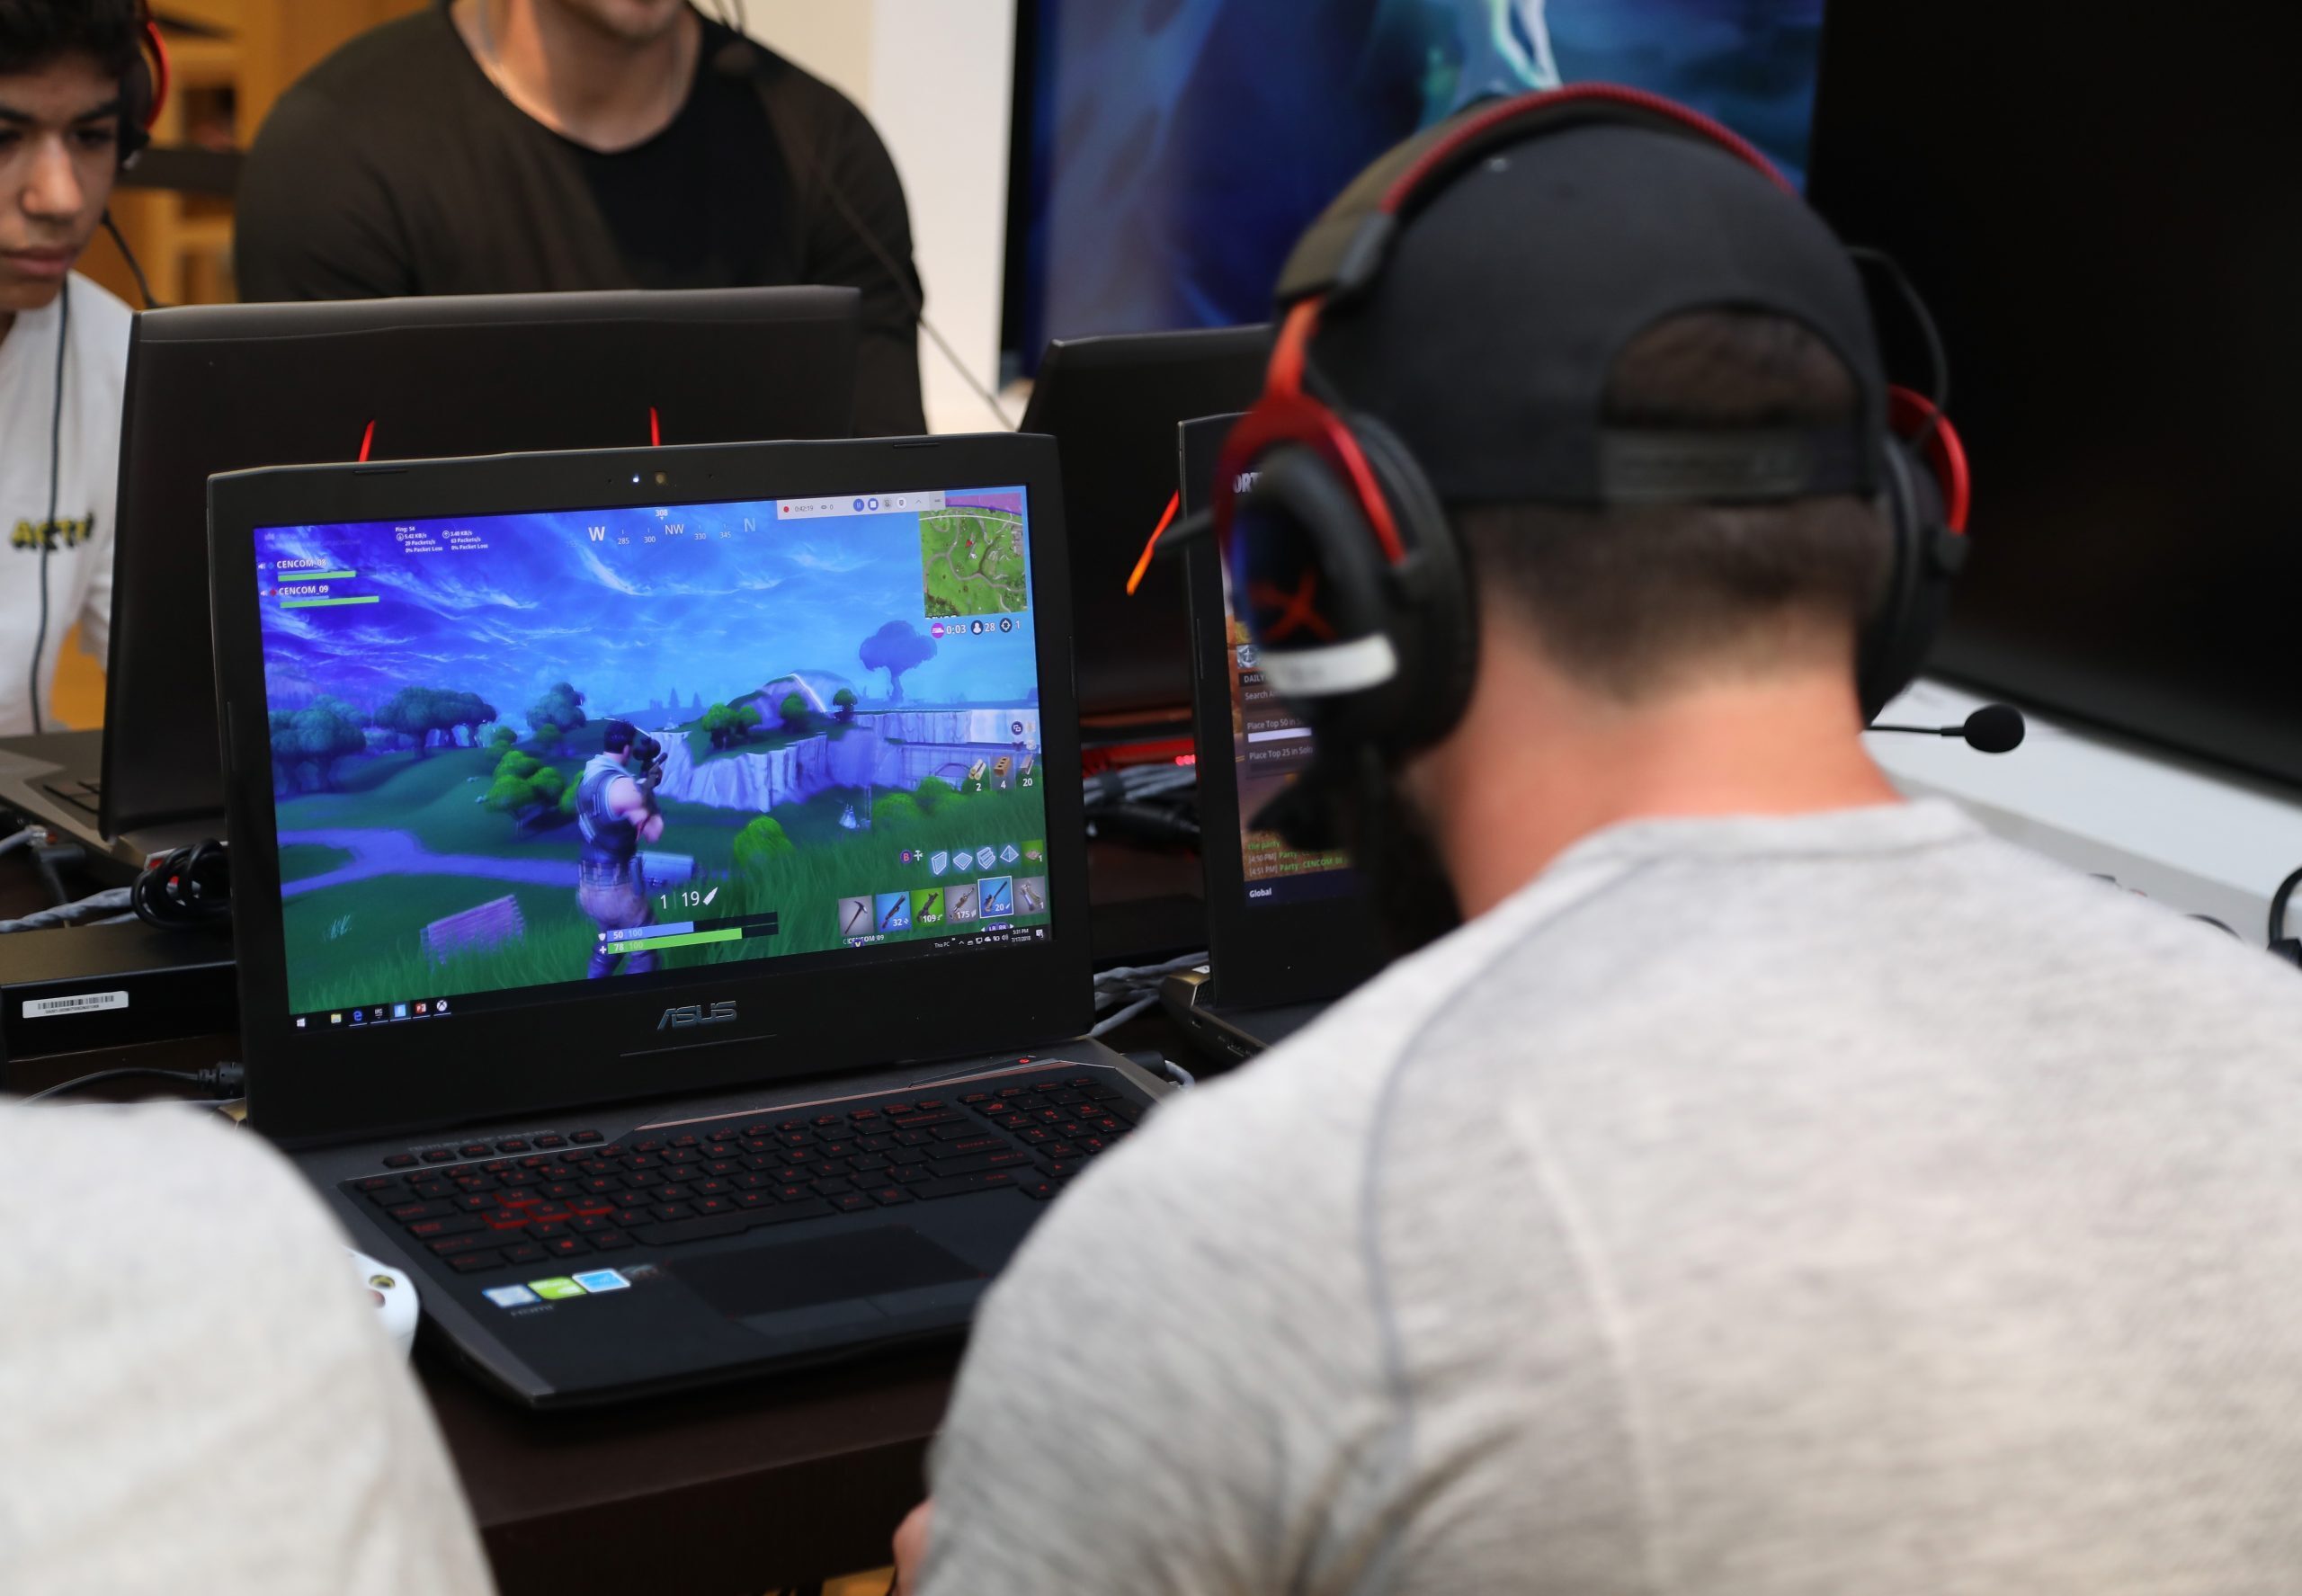 NFL player Baker Mayfield participates in the Microsoft Stores Pro Player Charity Fortnite Duos Tournament. (Photo courtesy of Getty Images)